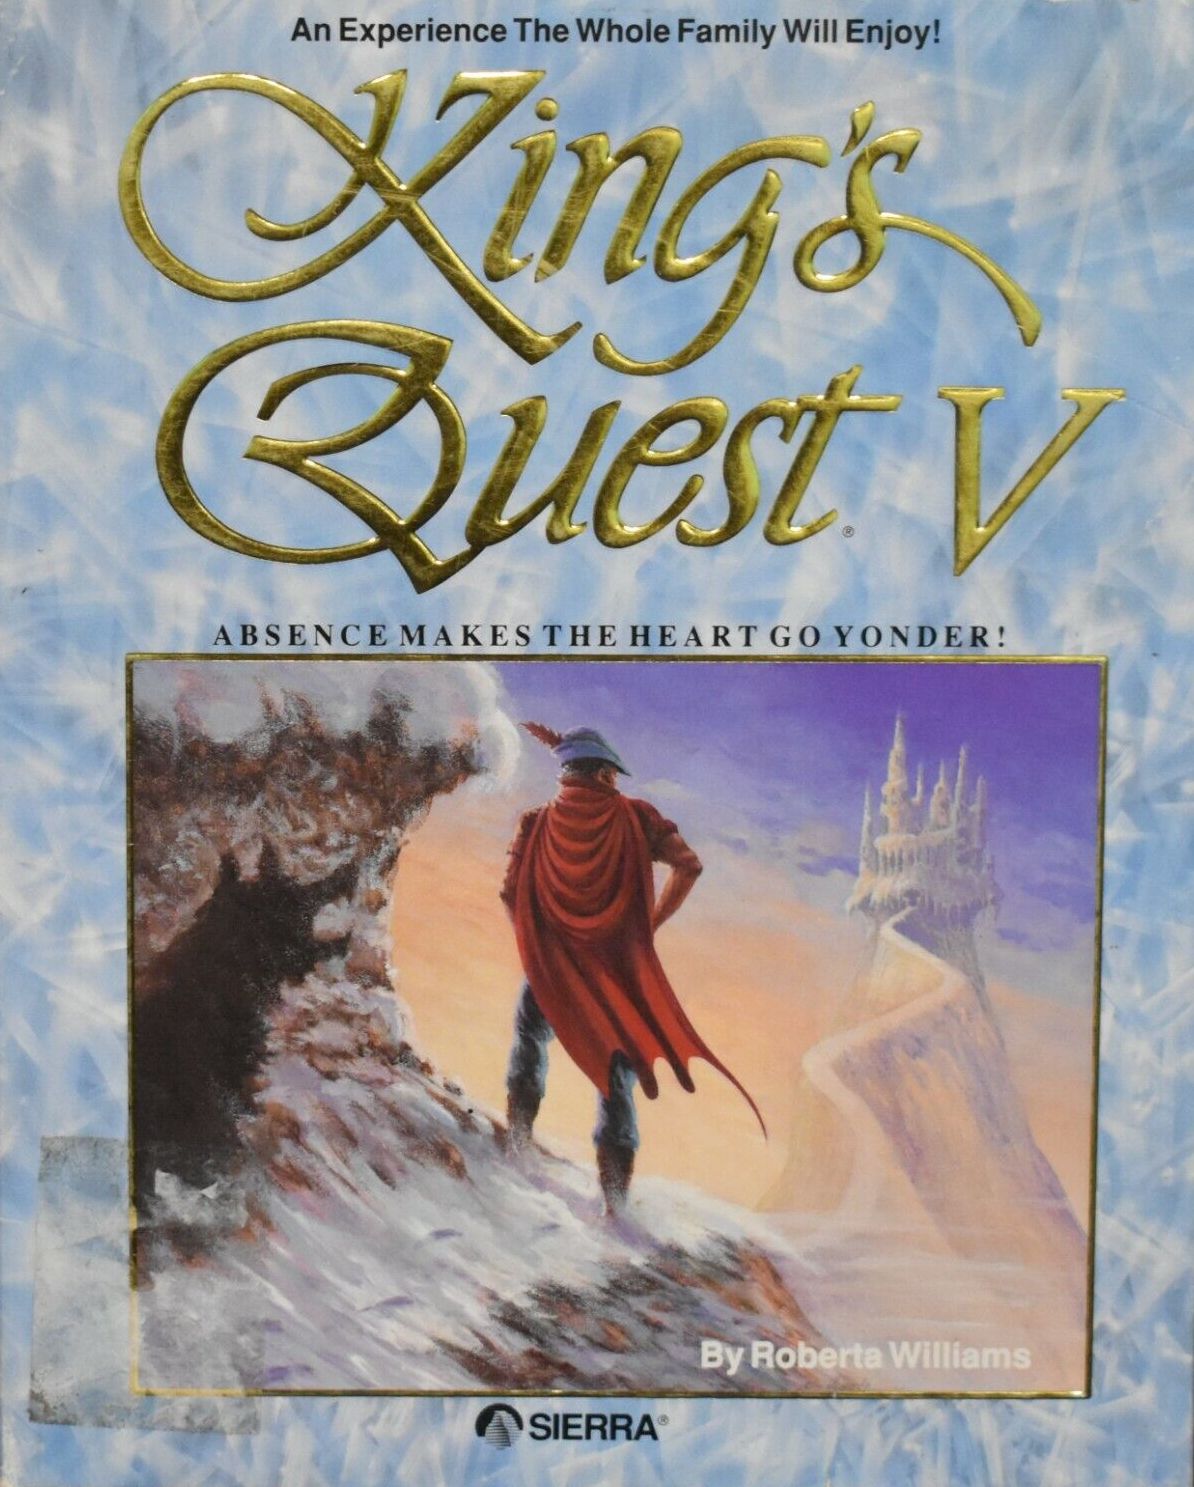 King's Quest V: Absence Makes The Heart Go Yonder! Video Game